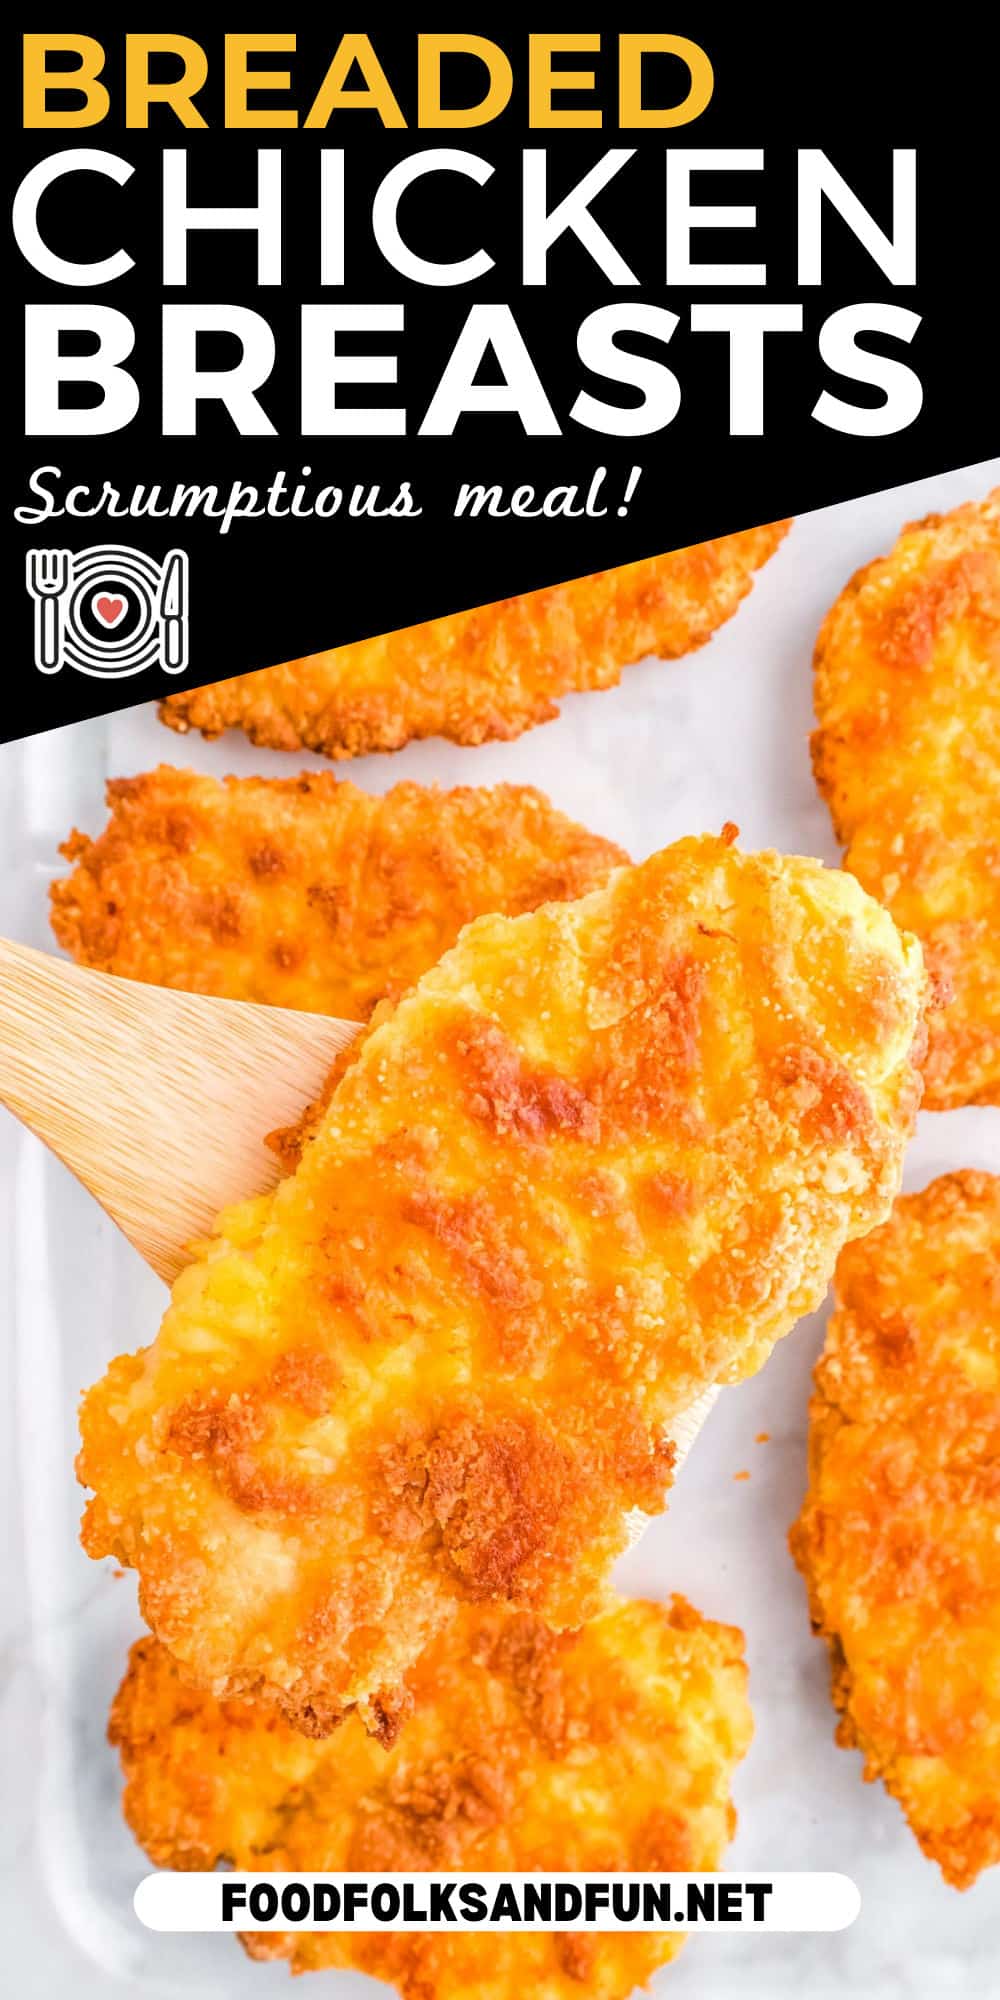 Baked Breaded Chicken is buttery and crispy on the outside and tender on the inside. This recipe is guaranteed to get rave reviews and recipe requests.  via @foodfolksandfun